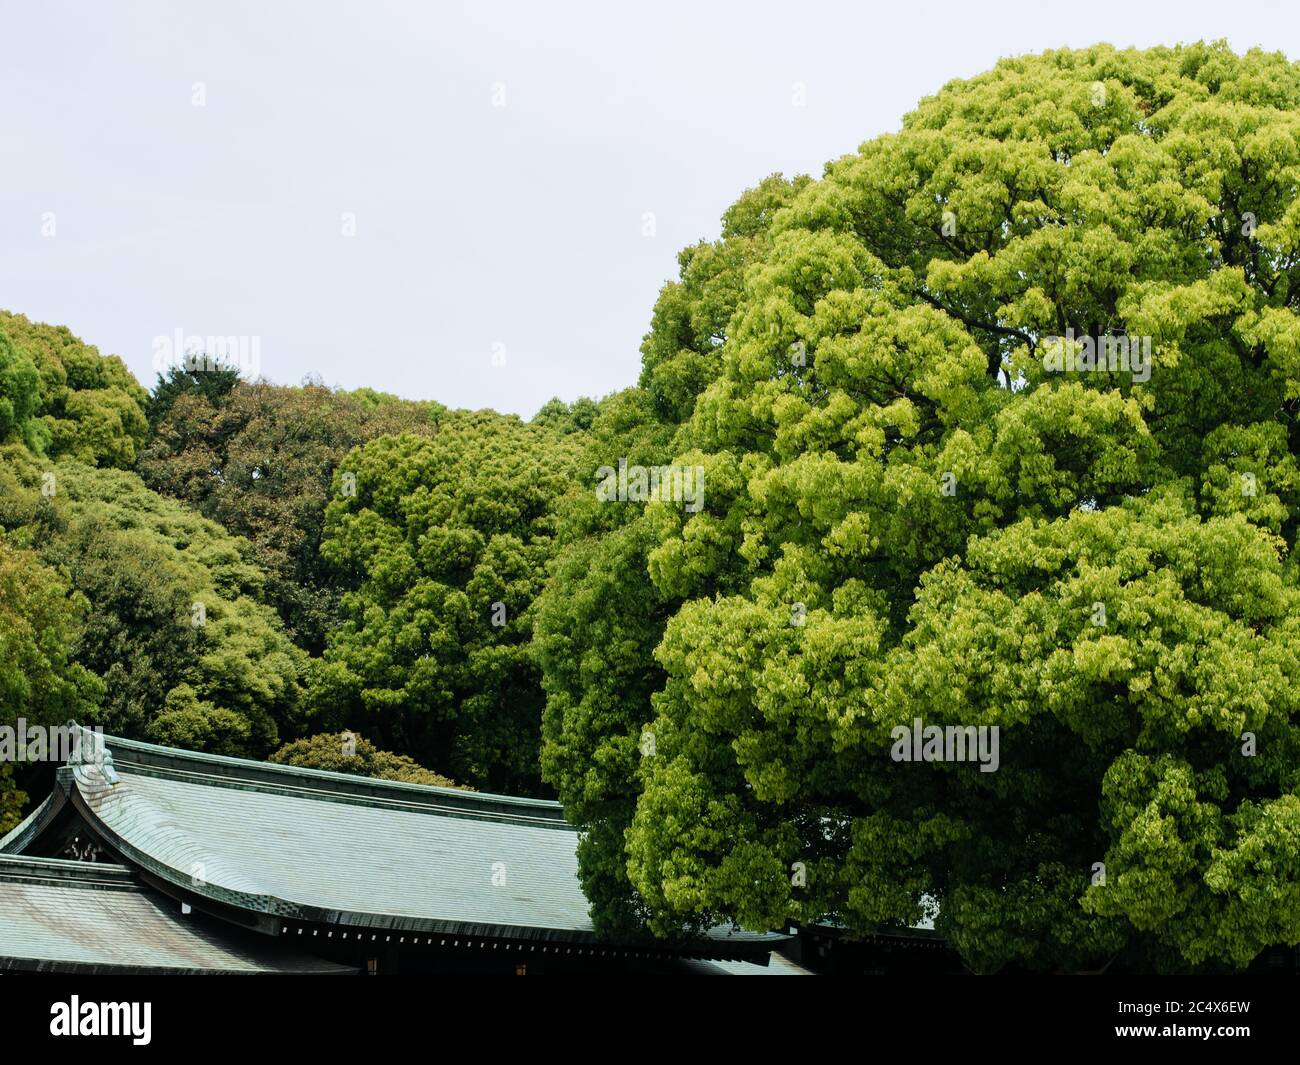 Meiji Shrine, Shibuya, Tokyo, Japan - Huge green leafy trees and roof of the temple dedicated to the deified spirits of Emperor Meiji and his wife. Stock Photo